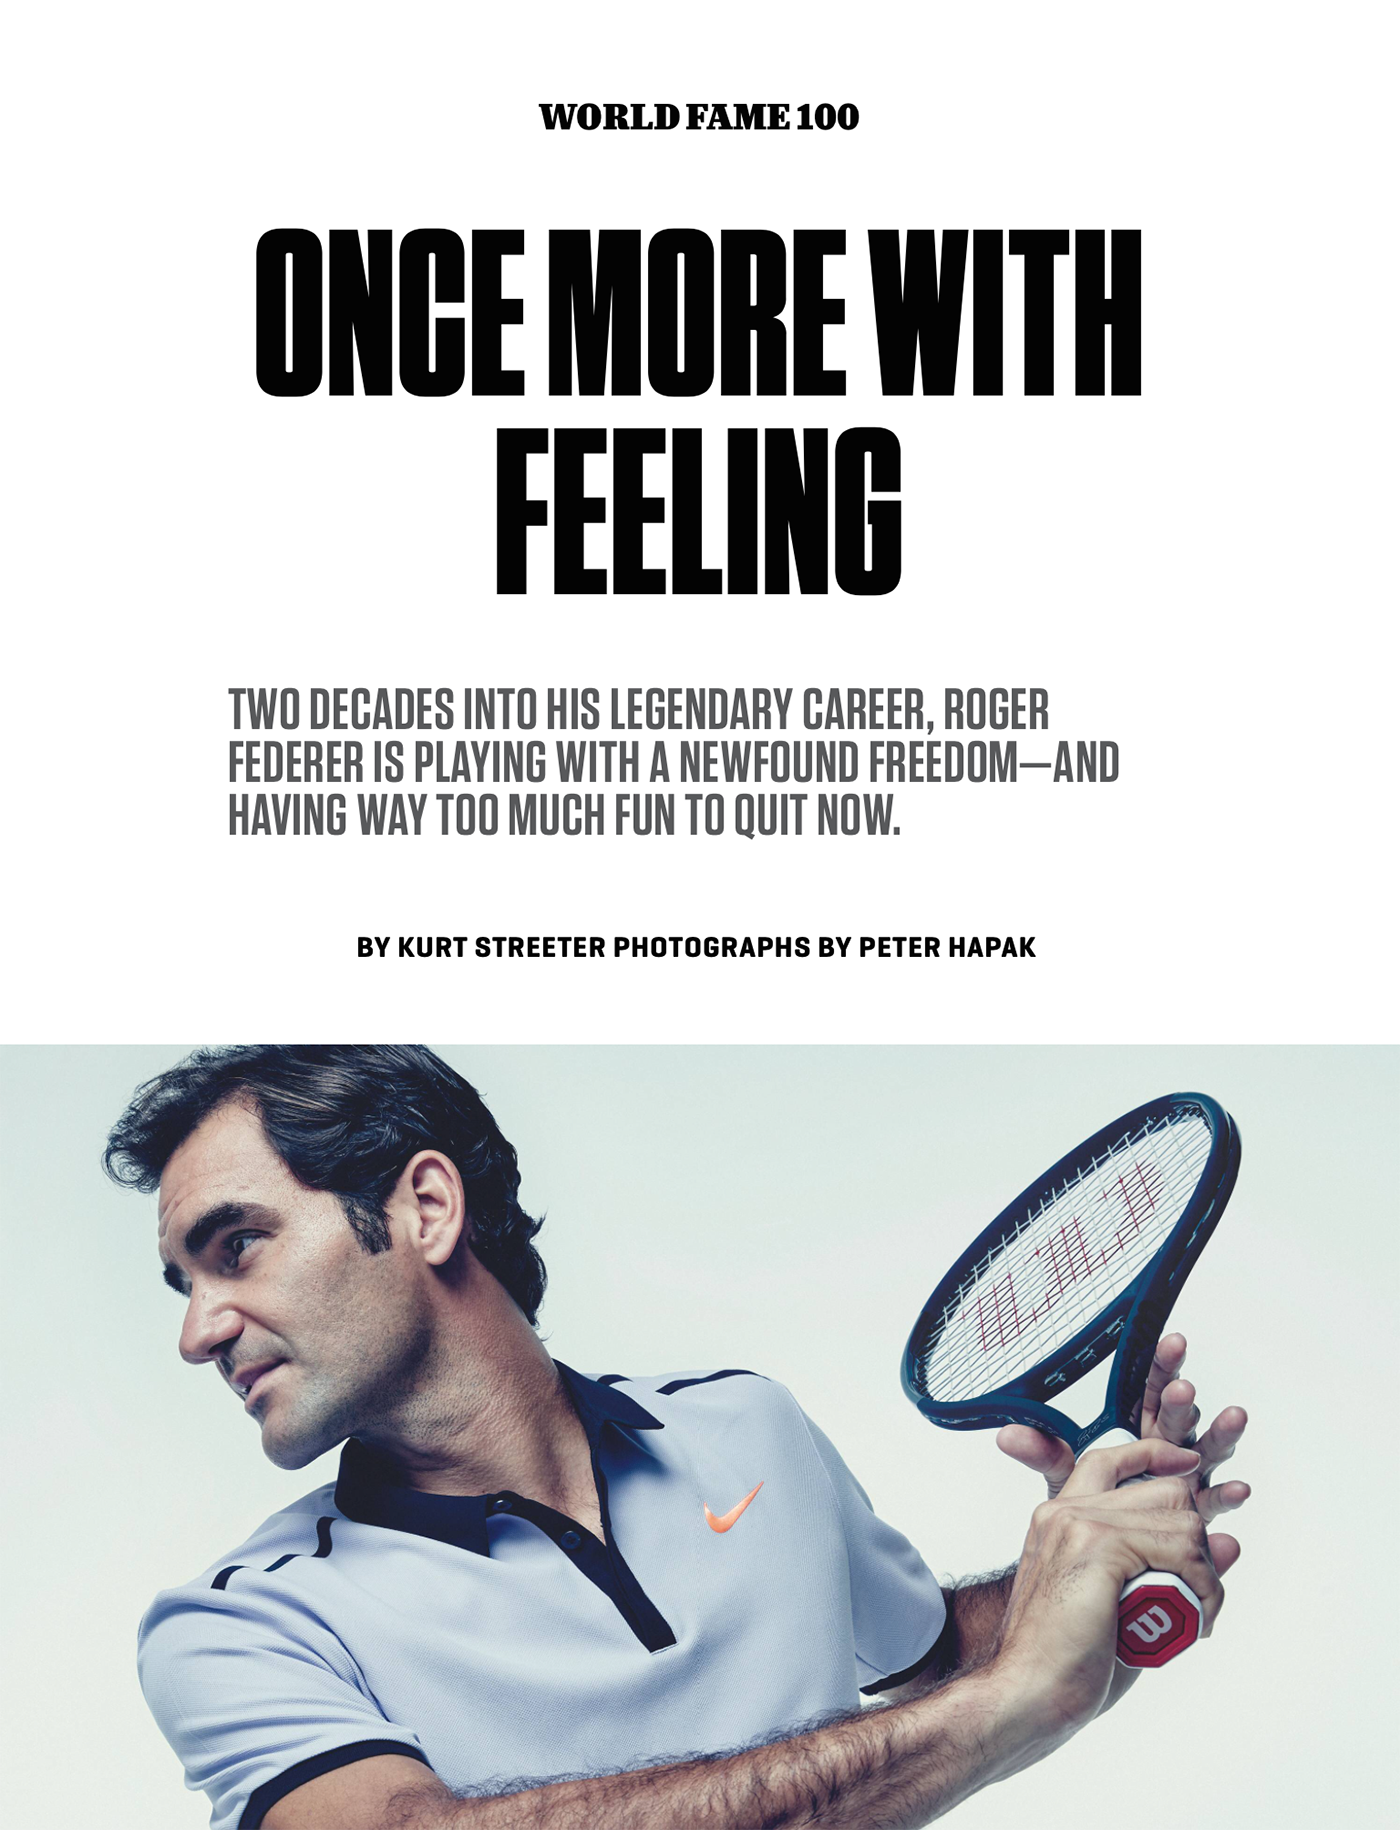 Magazine cover featuring man with tennis racket